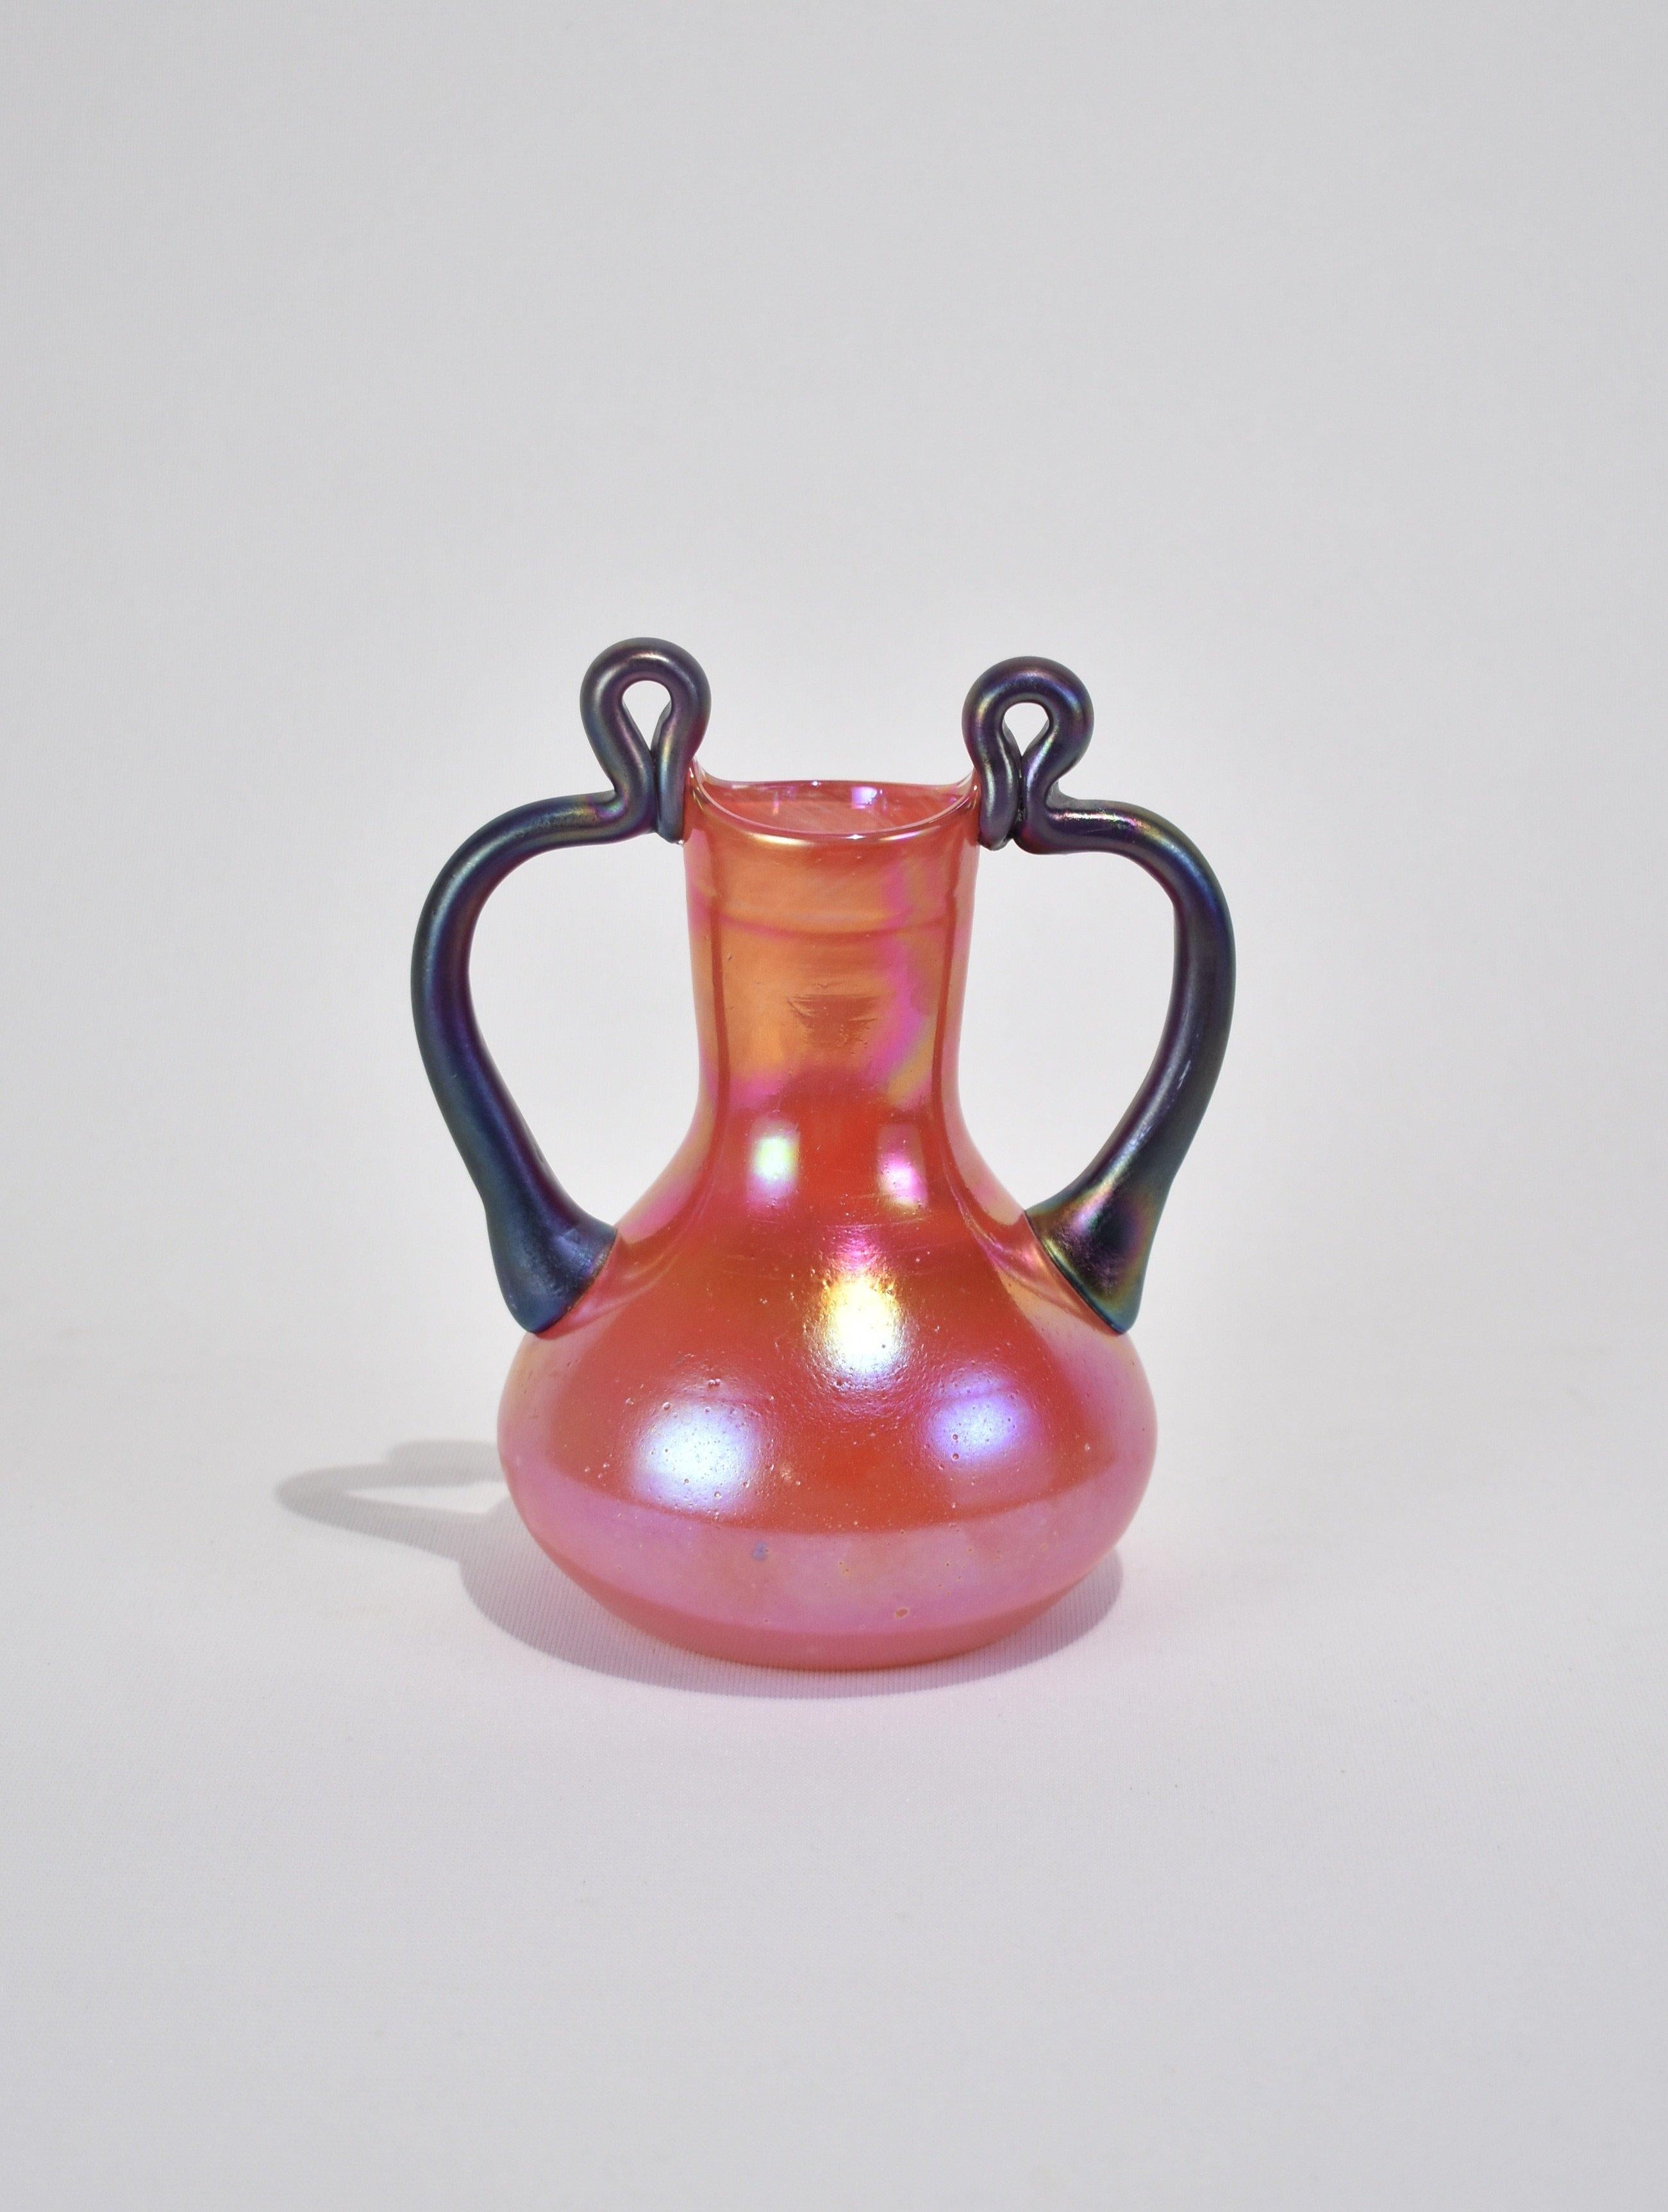 Beautiful, hand blown iridescent vase in red with two purple handles. Beautiful on its own or with a small arrangement of flowers. Signed on base.